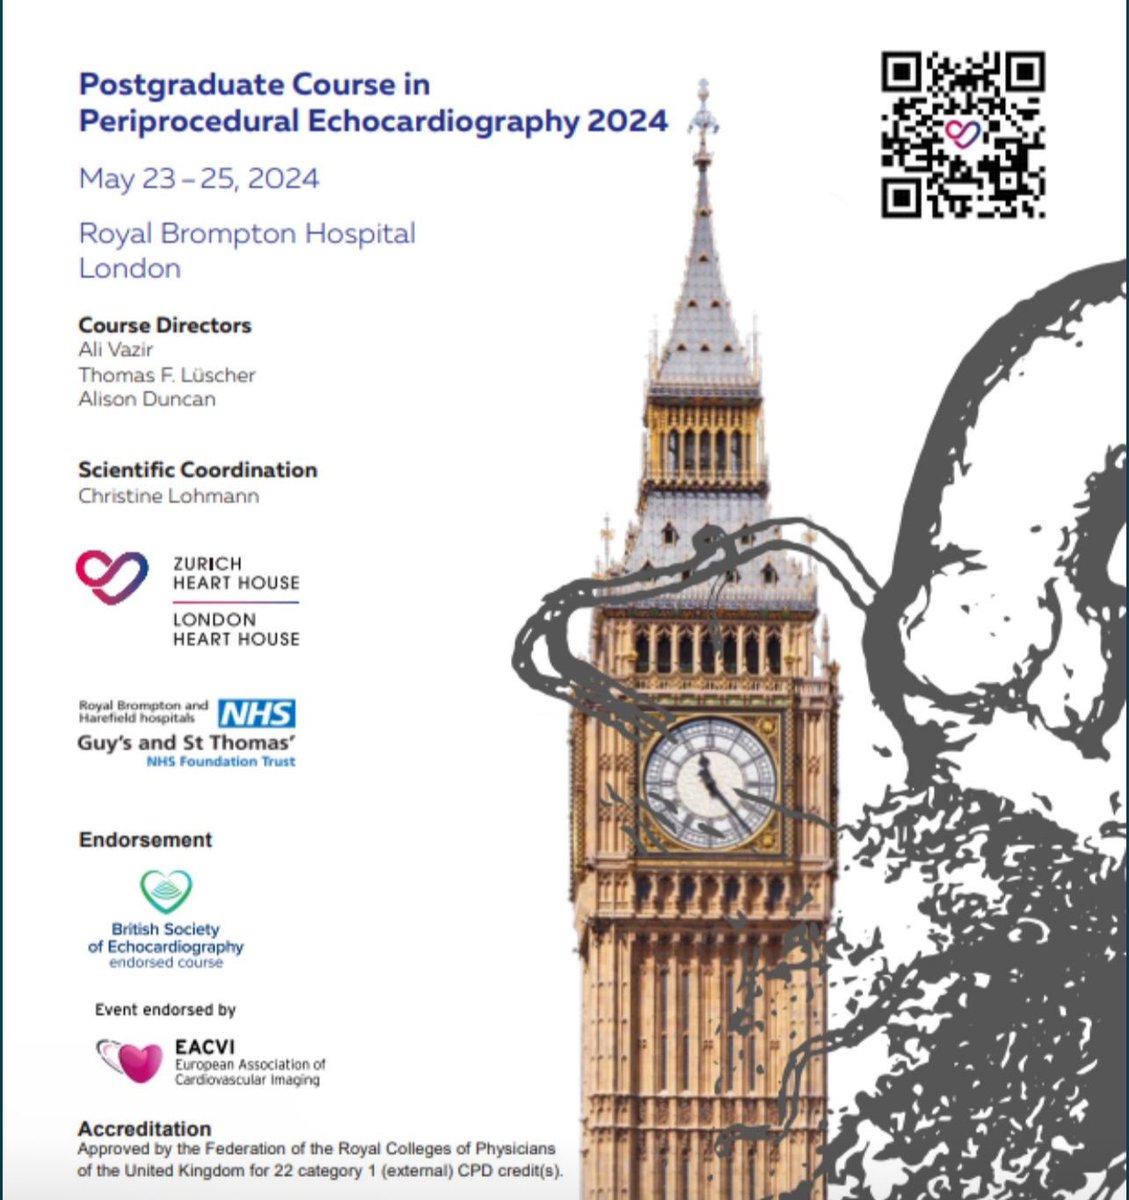 Still time to attend tomorrow & Saturday - everything you need to know about #periprocedural #echofirst organised by @avazir1 @dralisonduncan @TomLuscher @BromptonHeart with stellar faculty @VDelgadoGarcia @drmaisano @EchoSoliman @EeLingHeng1 & many more 🌟🌟 Day tickets